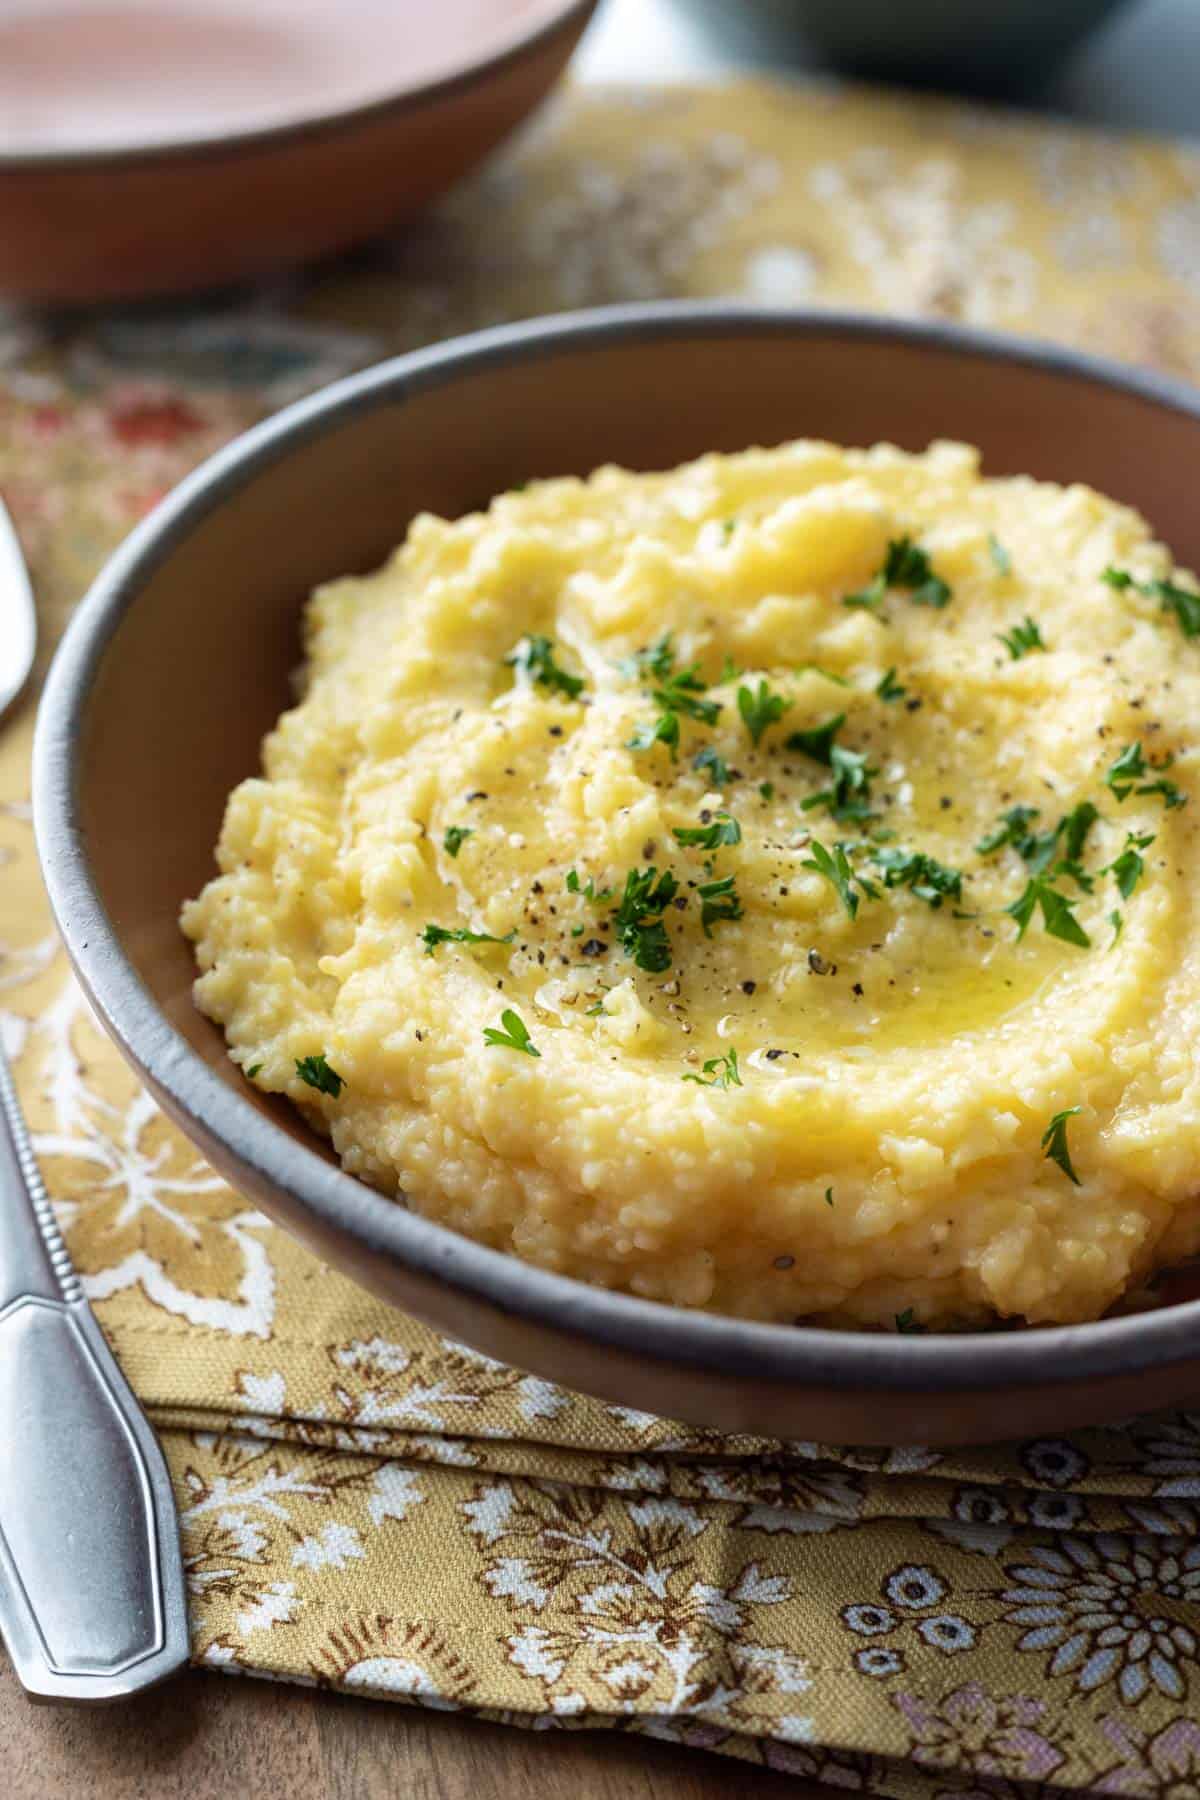 Polenta garnished with olive oil and parsley in a red serving bowl.